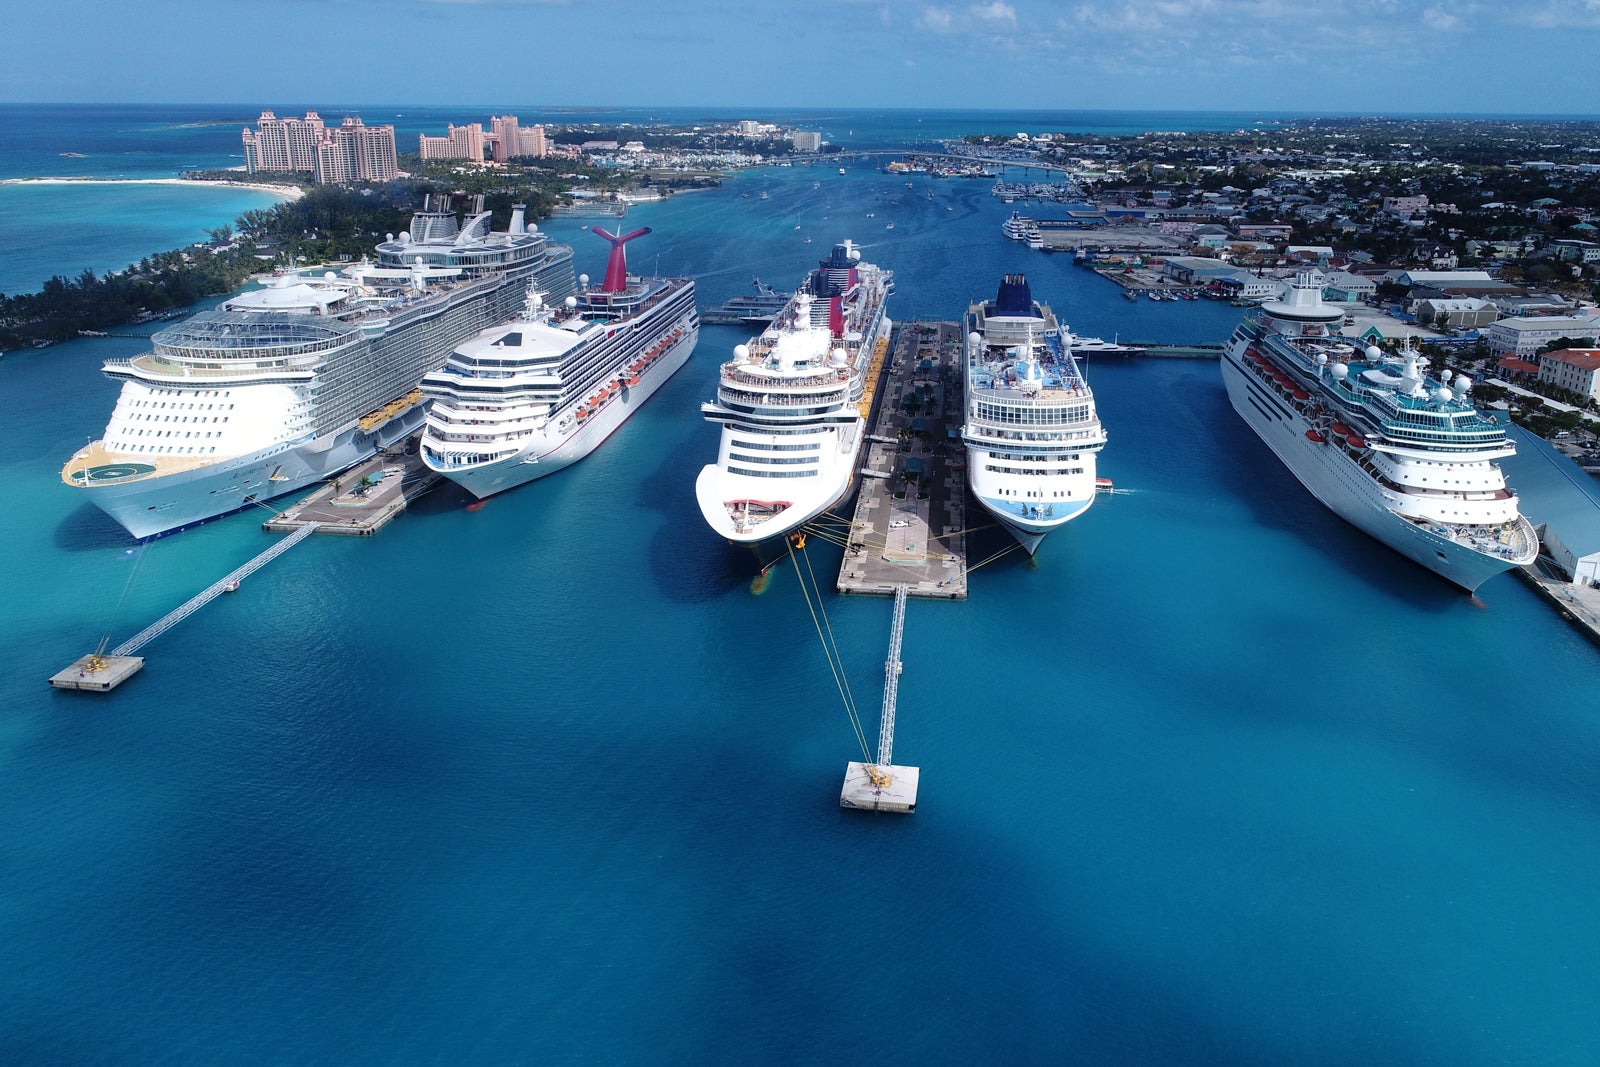 Five cruise ships docked in a row in Nassau, Bahamas